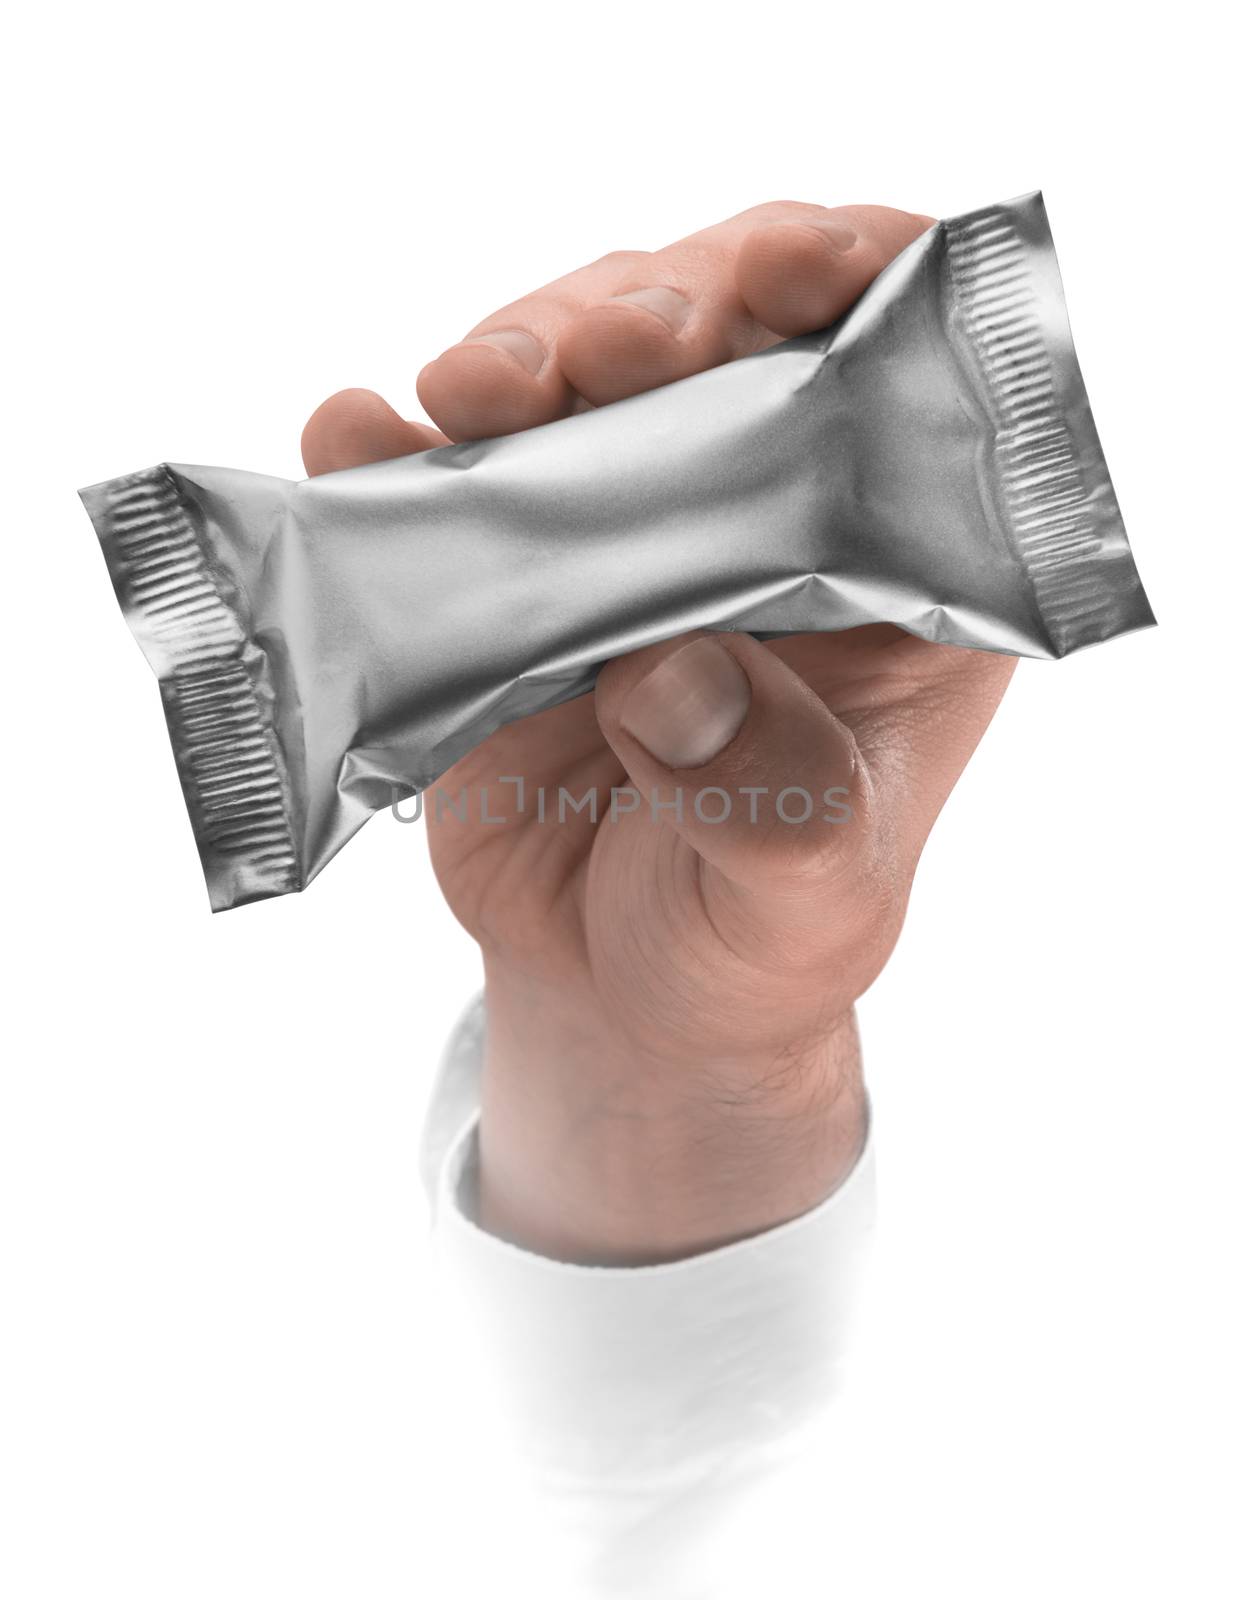 aluminum packaging in hand by butenkow